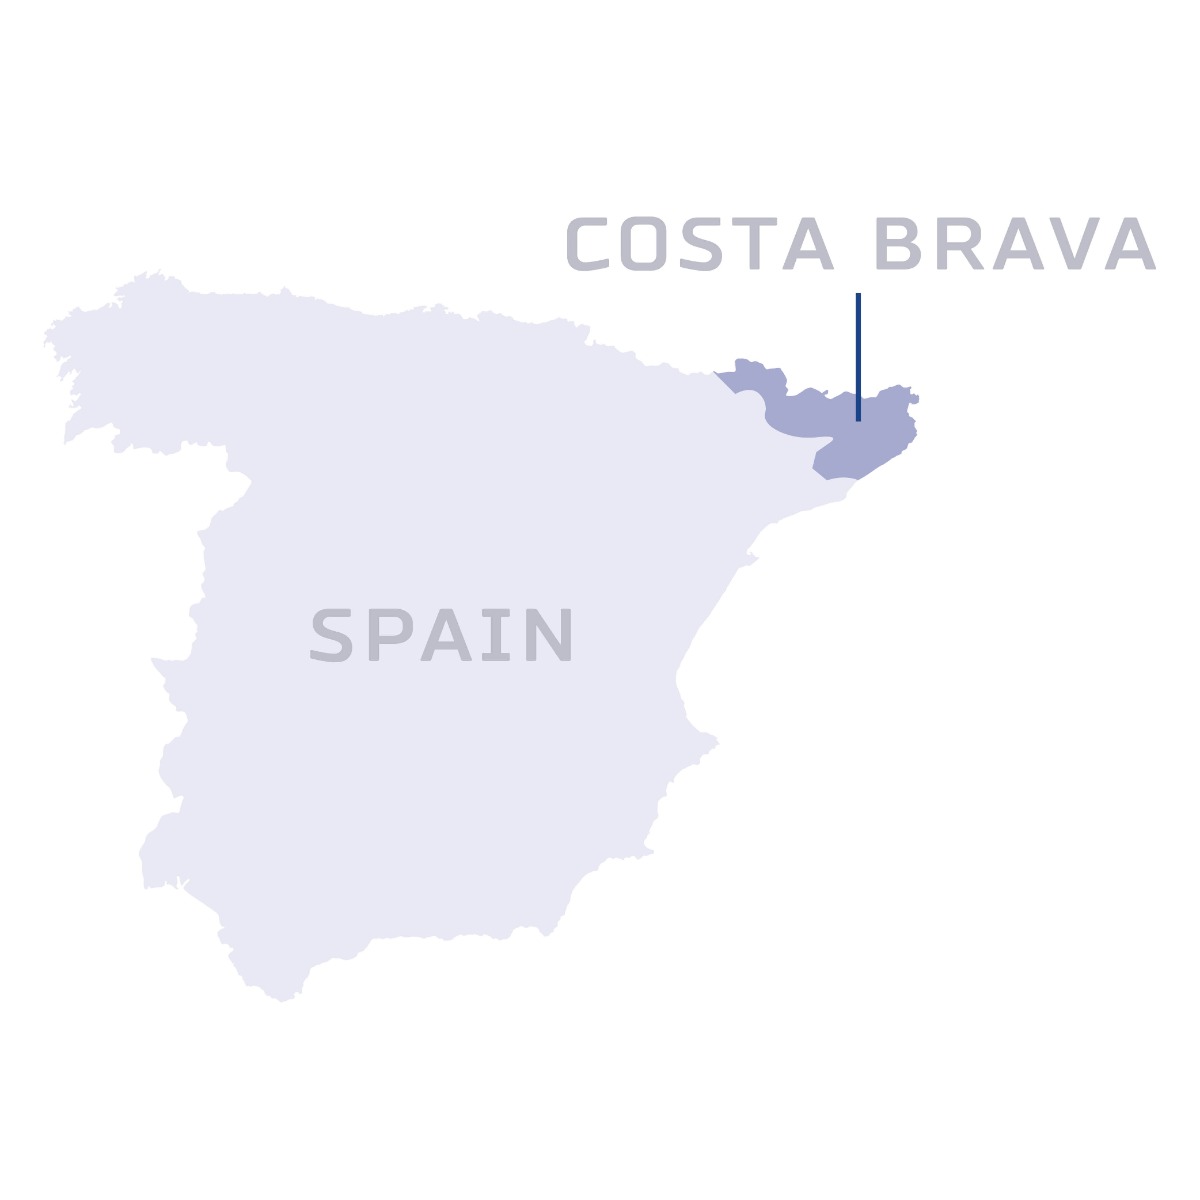 A detailed map of Spain with the enchanting Costa Brava region prominently marked along the beautiful Mediterranean coastline.